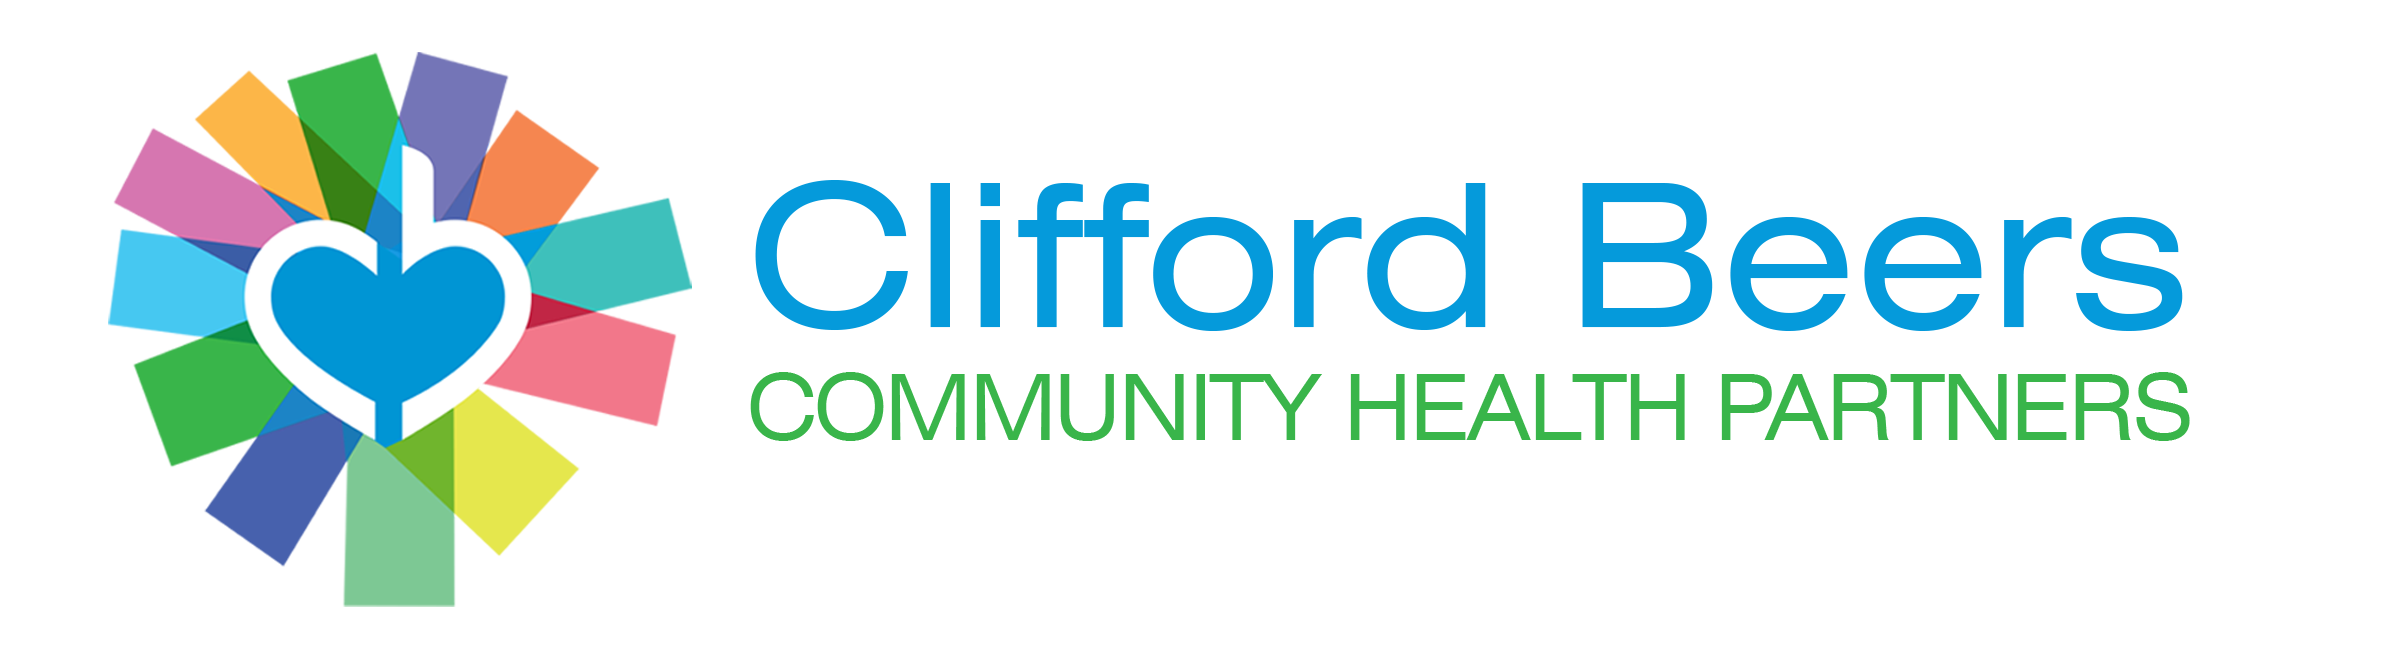 Clifford Beers Community Health Partners Logo